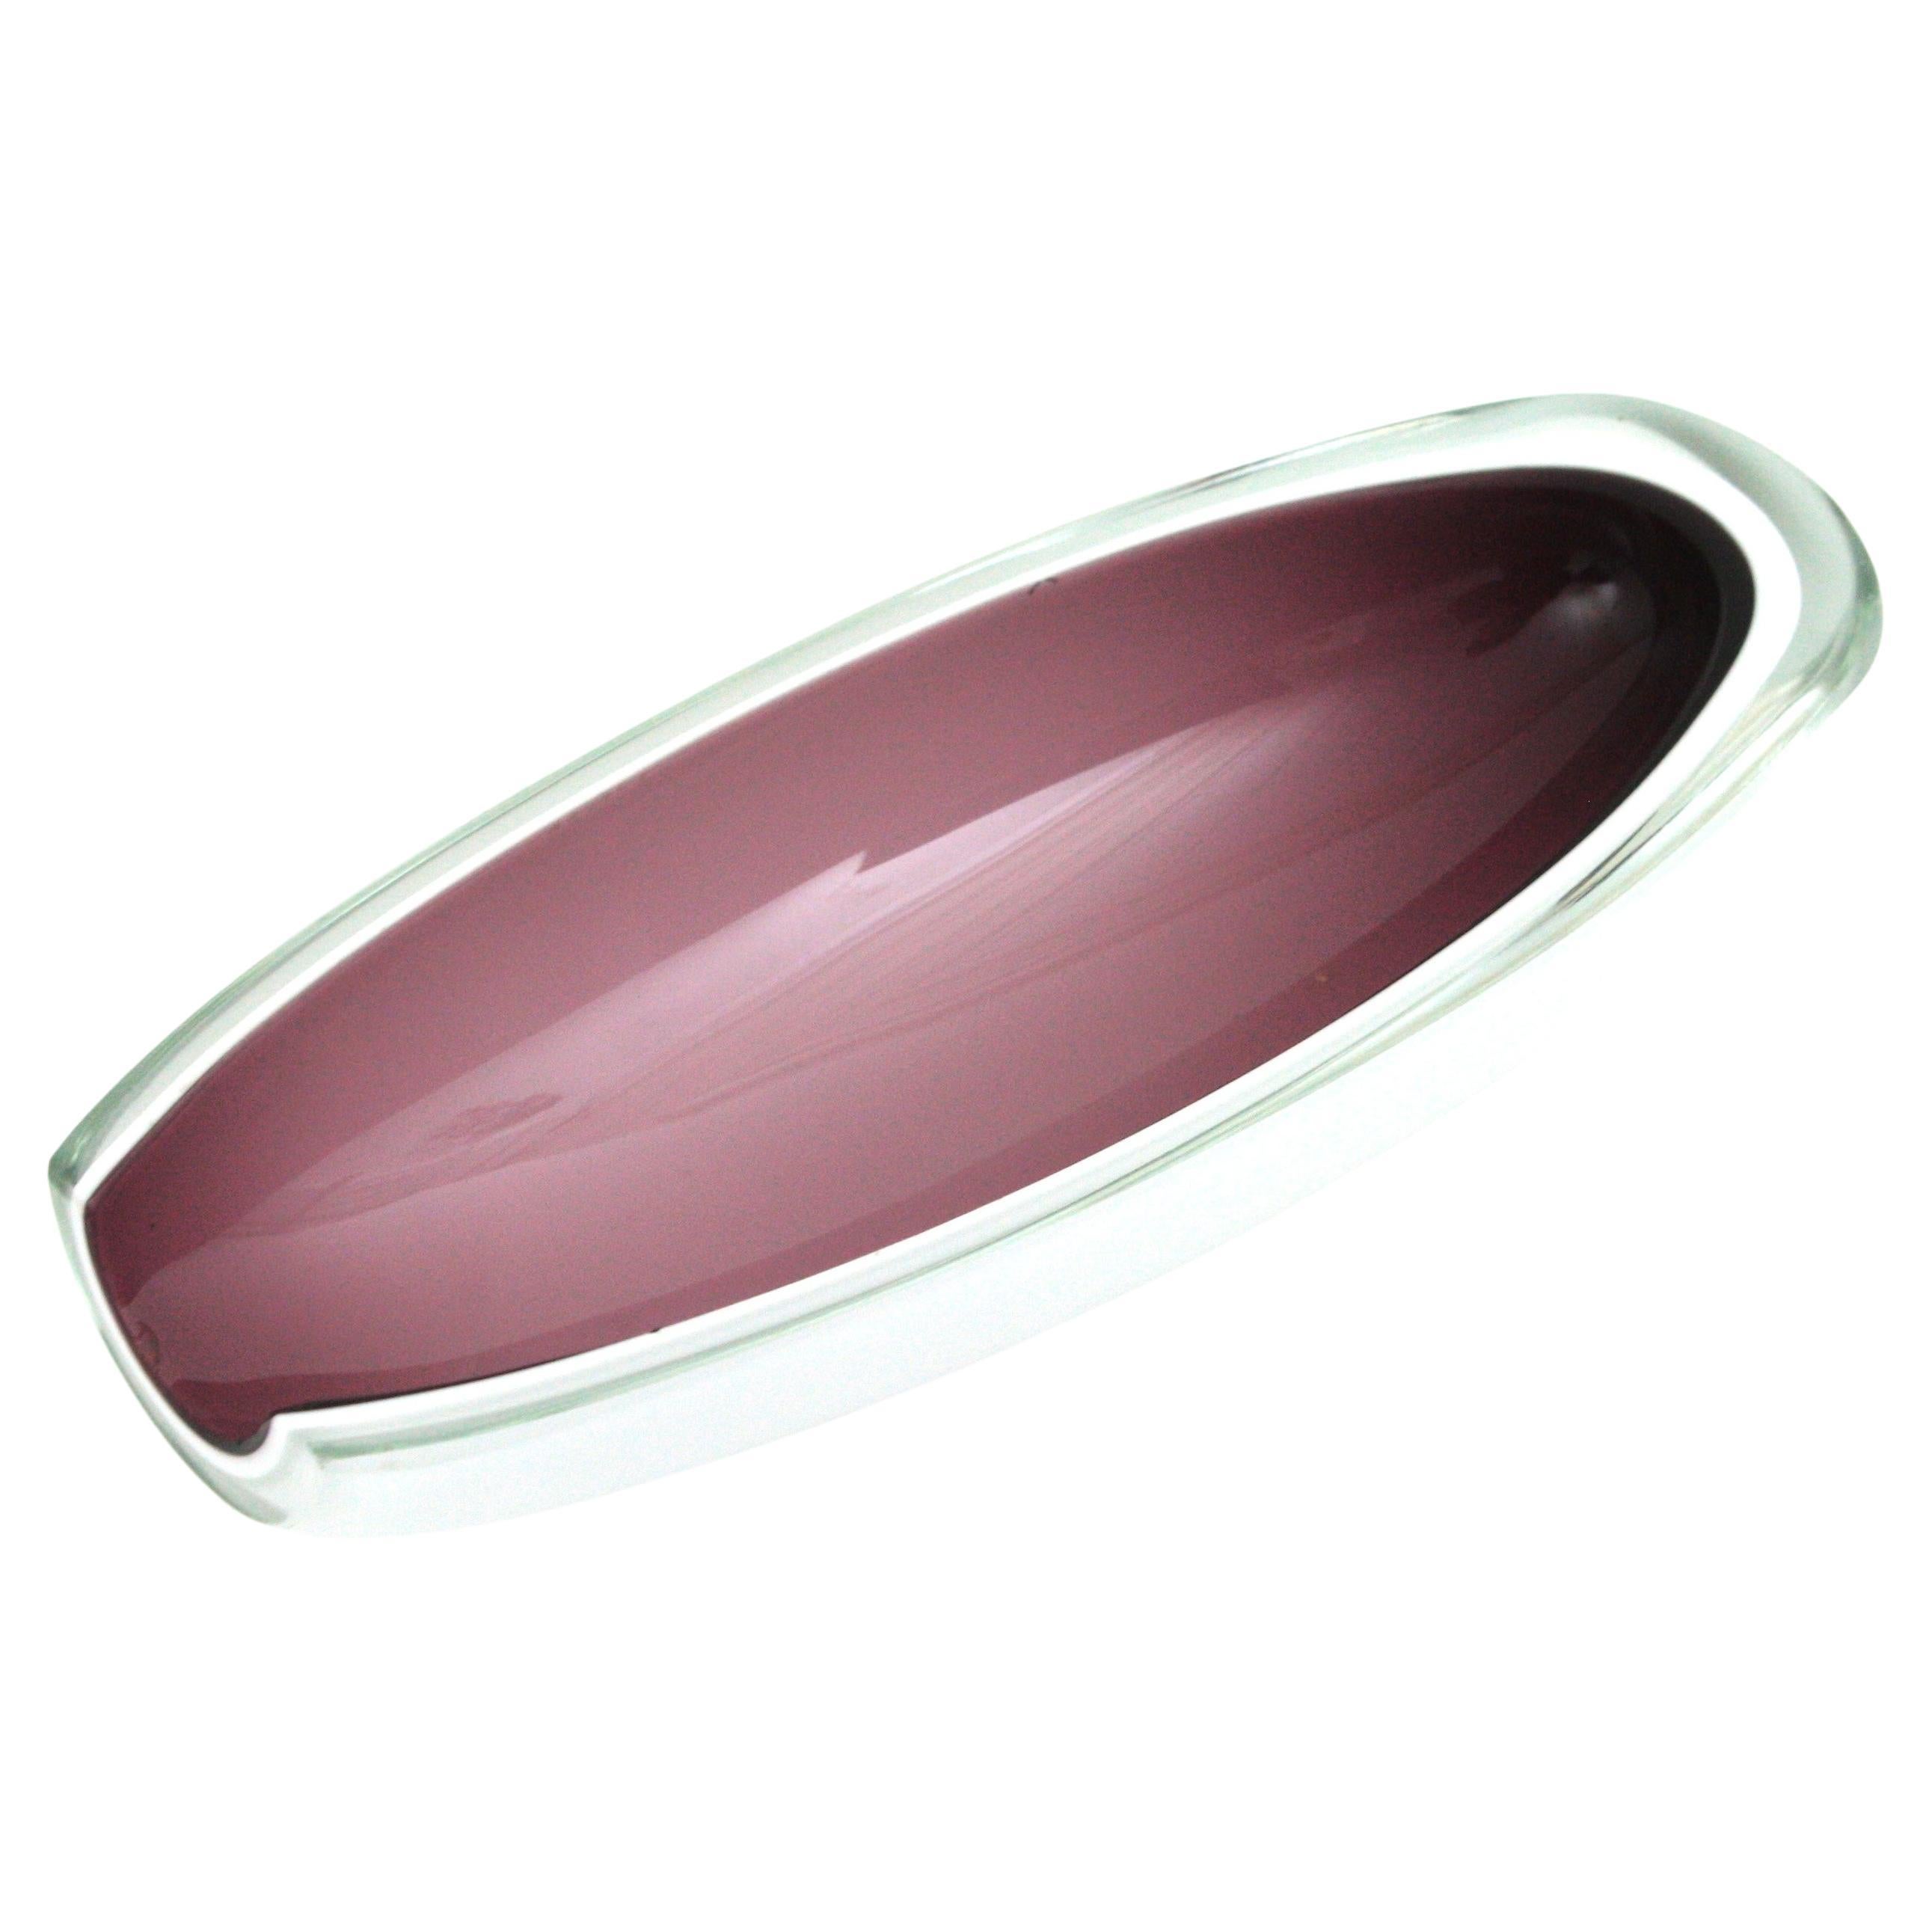 Archimede Seguso oval geode Murano glass Sommerso bowl / ashtray. Italy, 1950s-1960s.
Beautiful elongate shape with purple eggplant and white alabastro glass cased into clear glass using the sommerso technique.
Flat cut top and flat cut side.
A